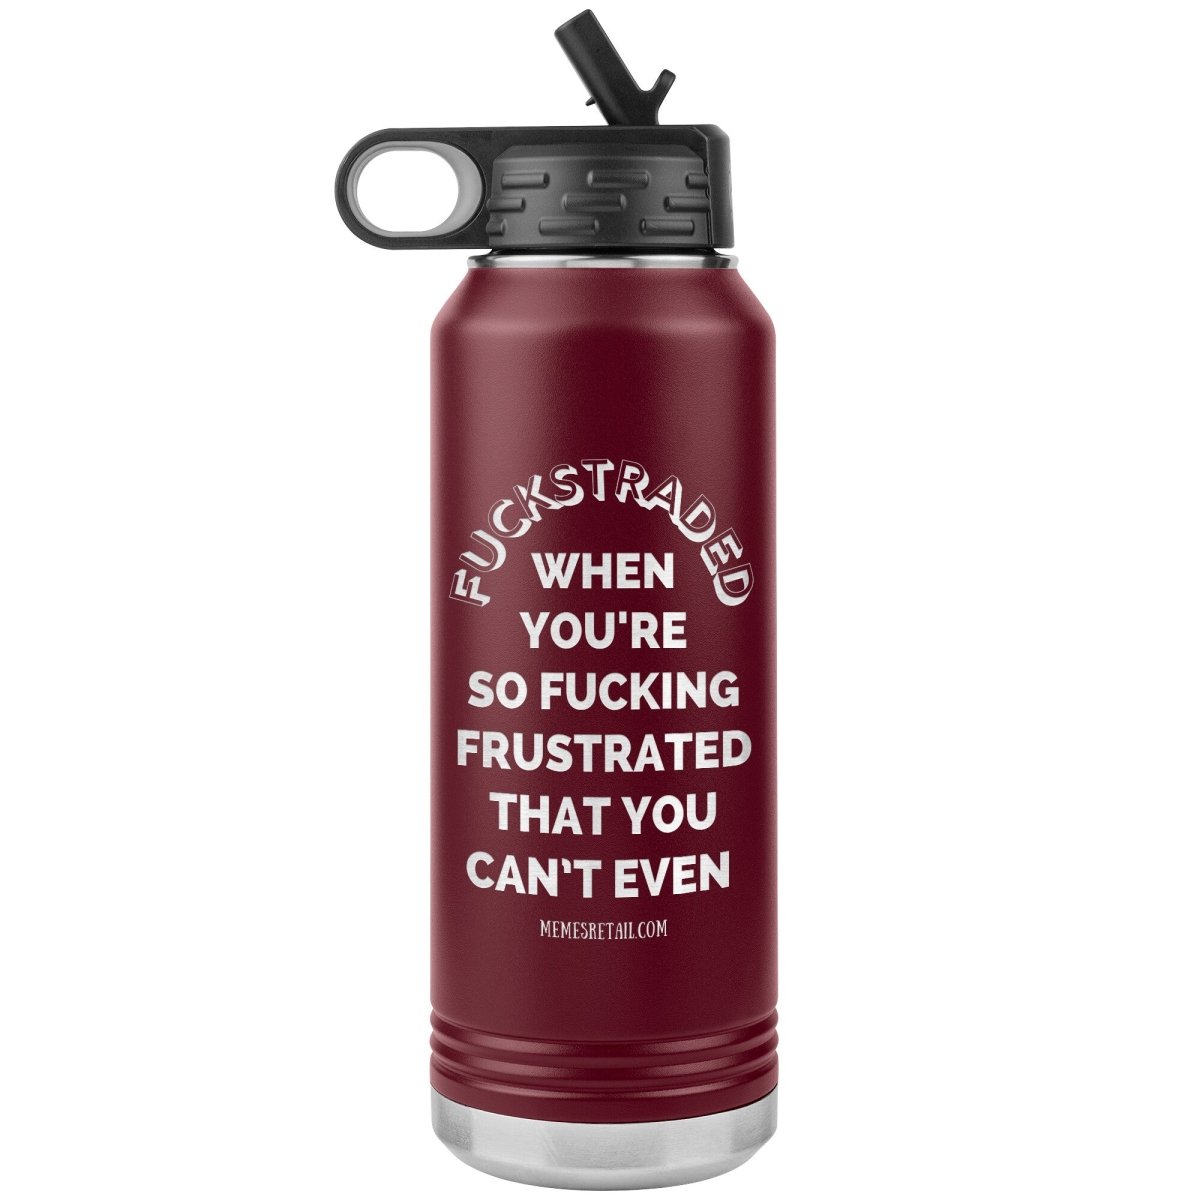 Fuckstraded, When You're So Fucking Frustrated That You Can’t Even - 32oz Water Tumblers, Maroon - MemesRetail.com